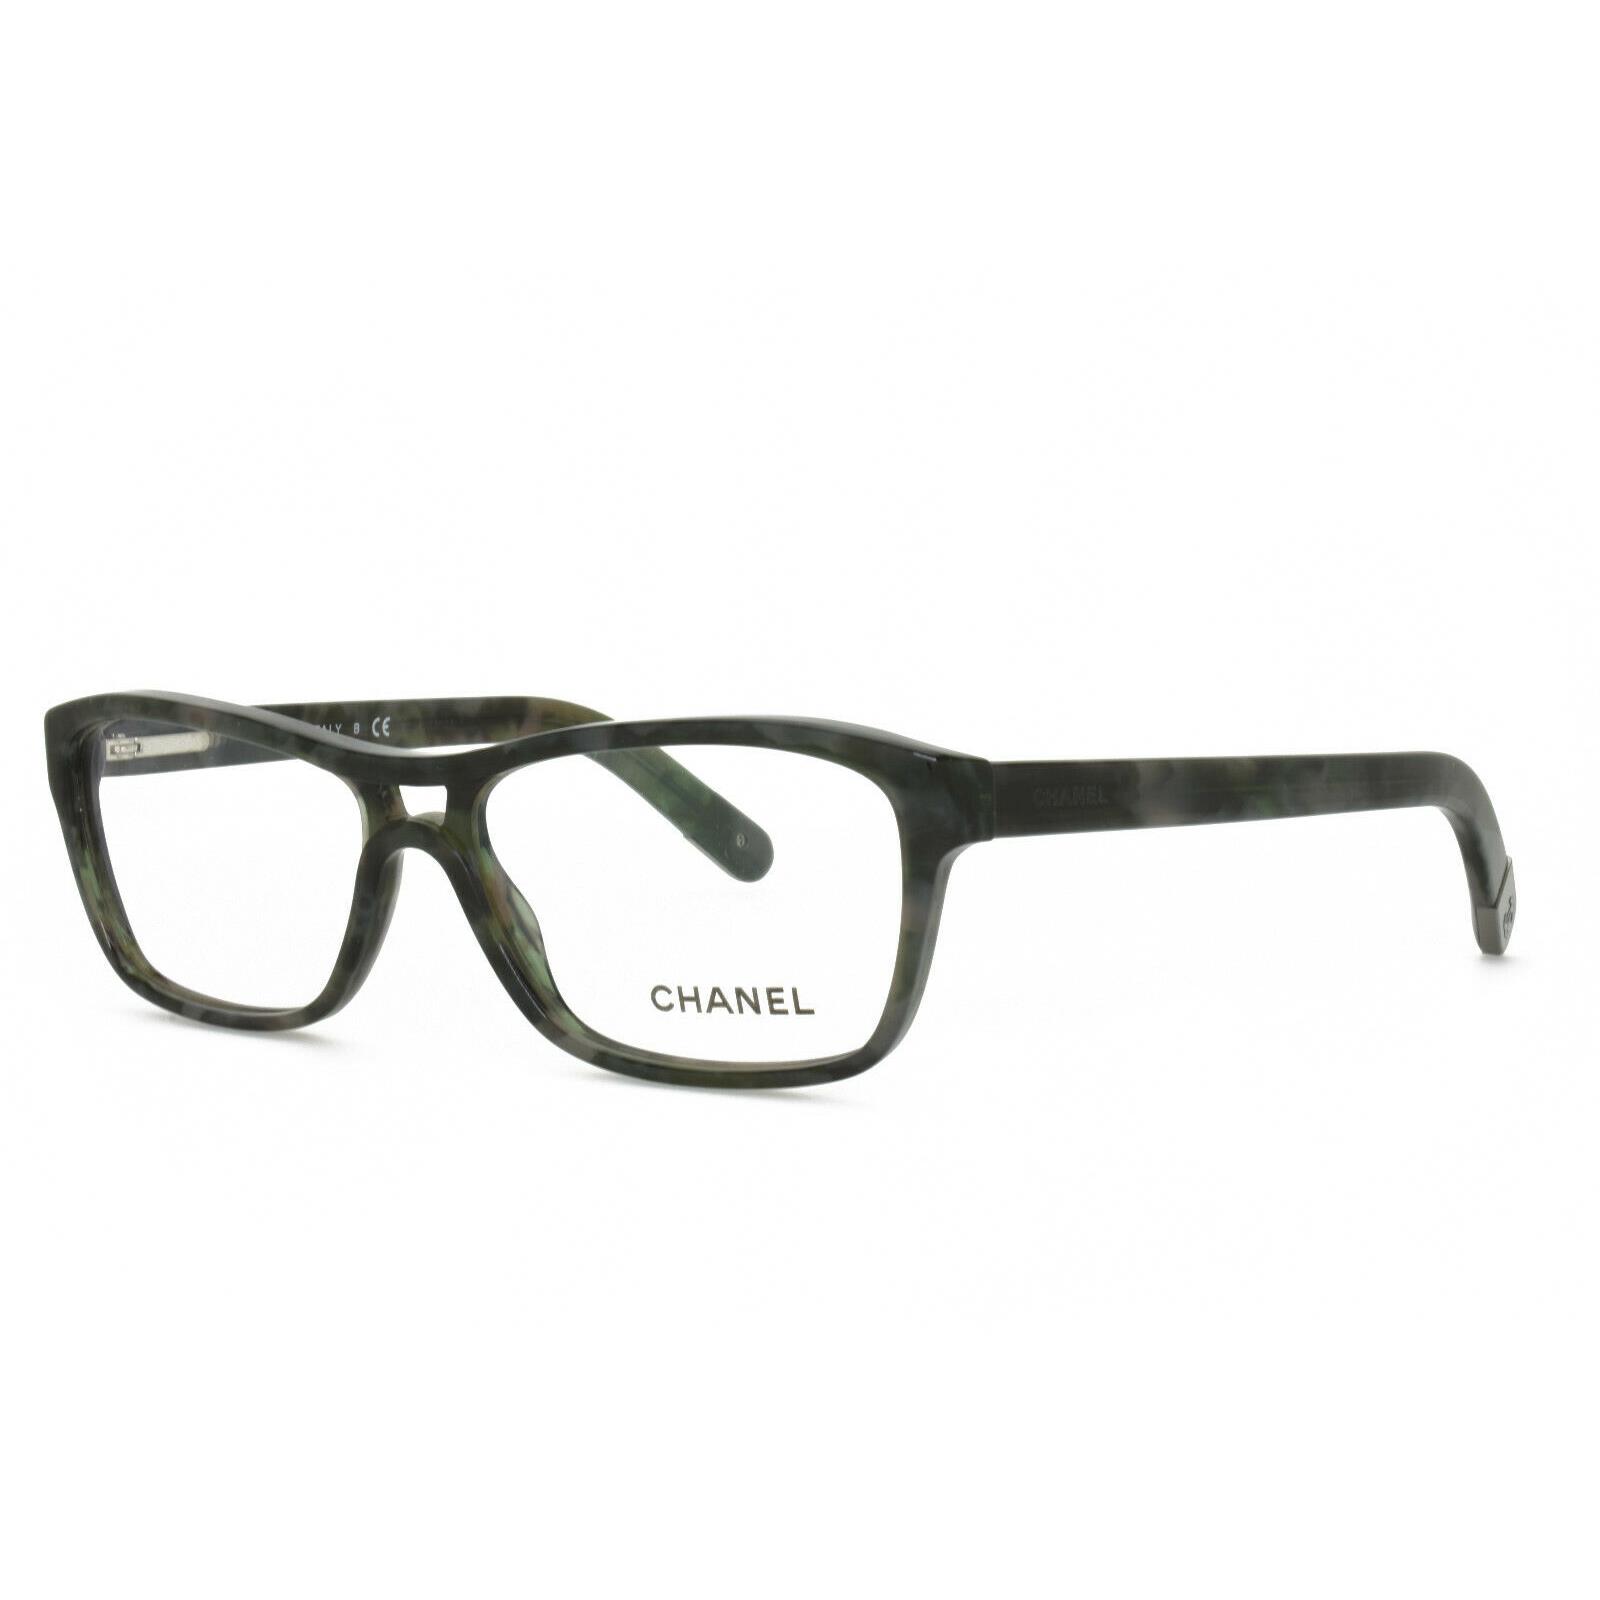 Chanel Eyeglasses 3238 1391 54-15-135 Without Case